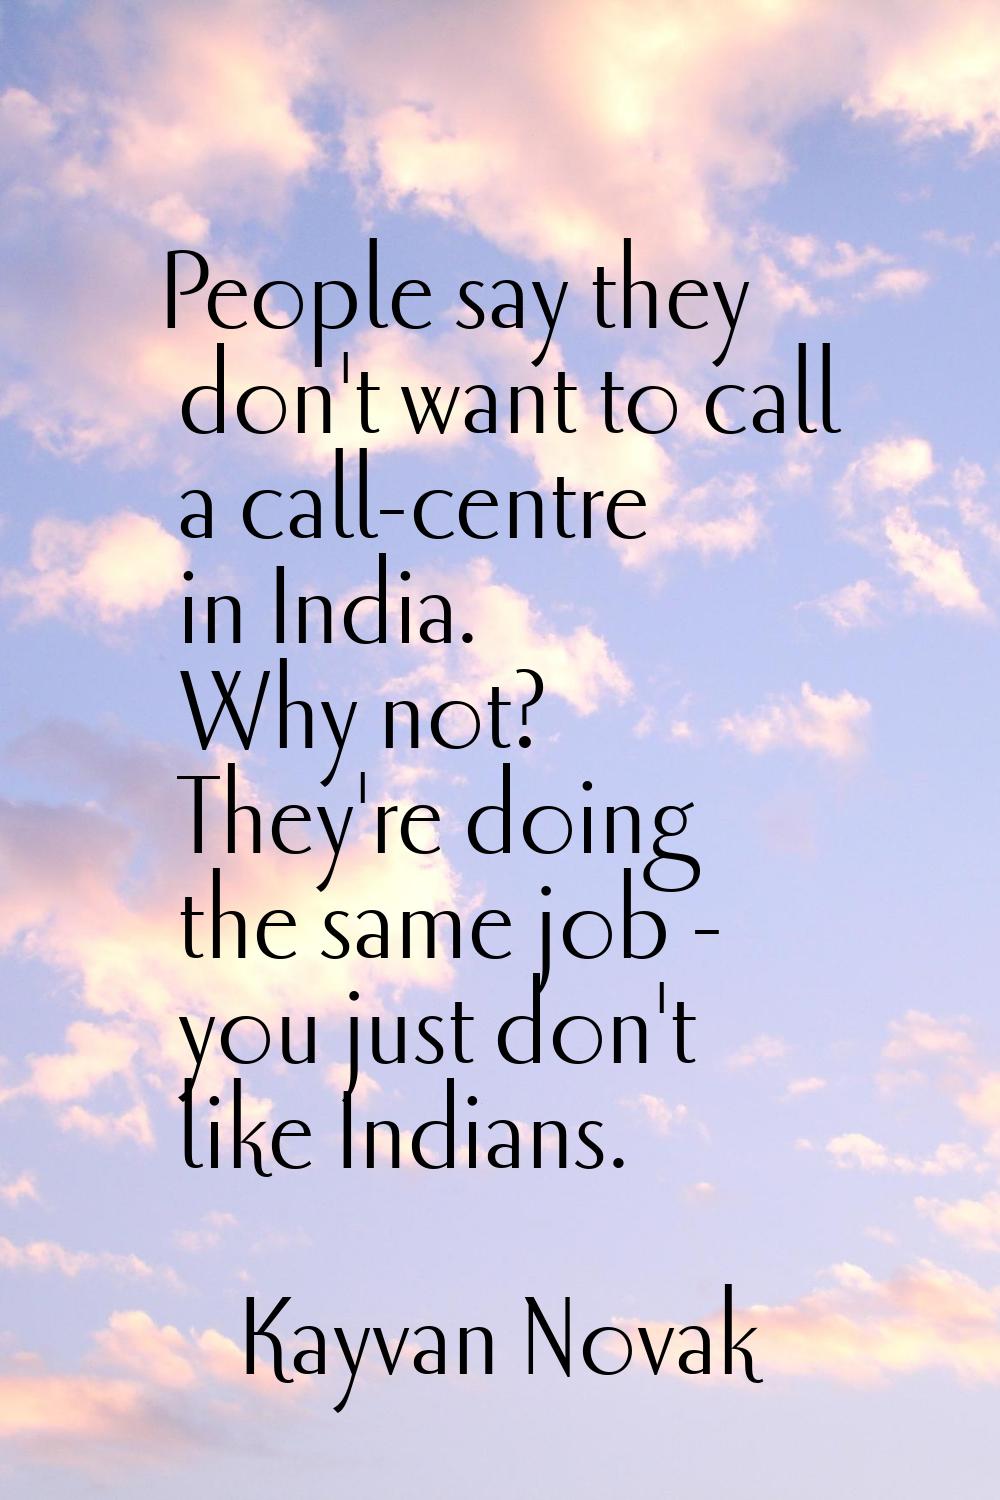 People say they don't want to call a call-centre in India. Why not? They're doing the same job - yo